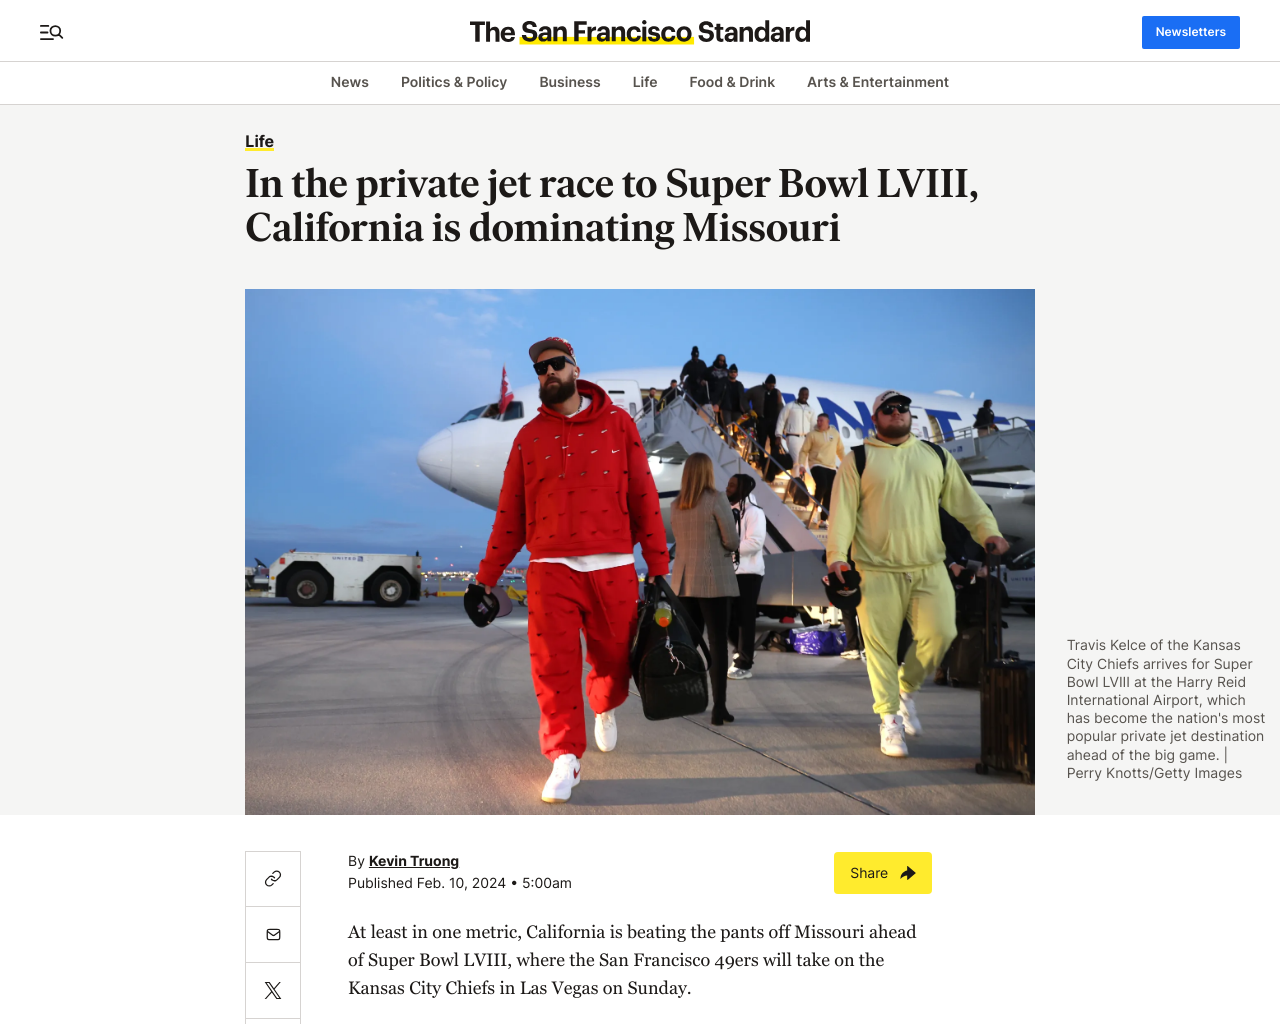 SF Standard: In the private jet race to Super Bowl LVIII, California is dominating Missouri